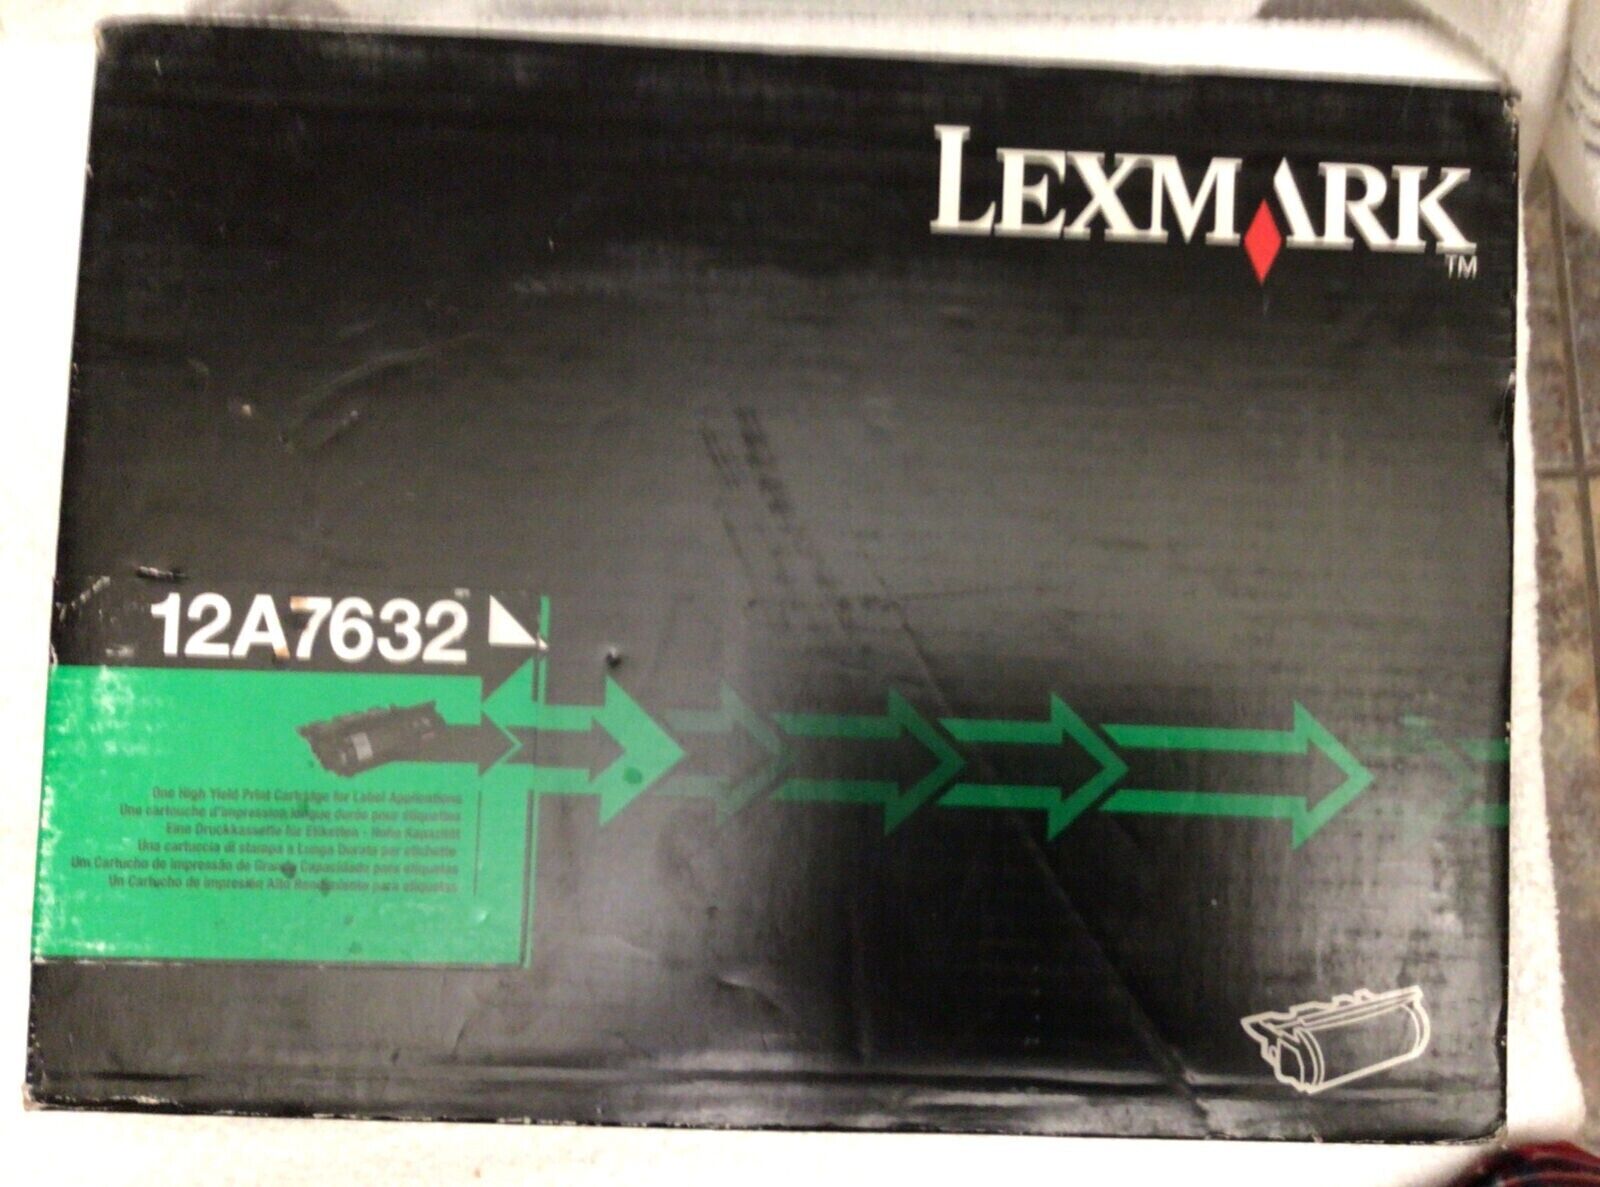 NEW in Box 12A7632 LEXMARK T630 T632 T634 TONER CART LABEL APPLICATIONS BLACK HY